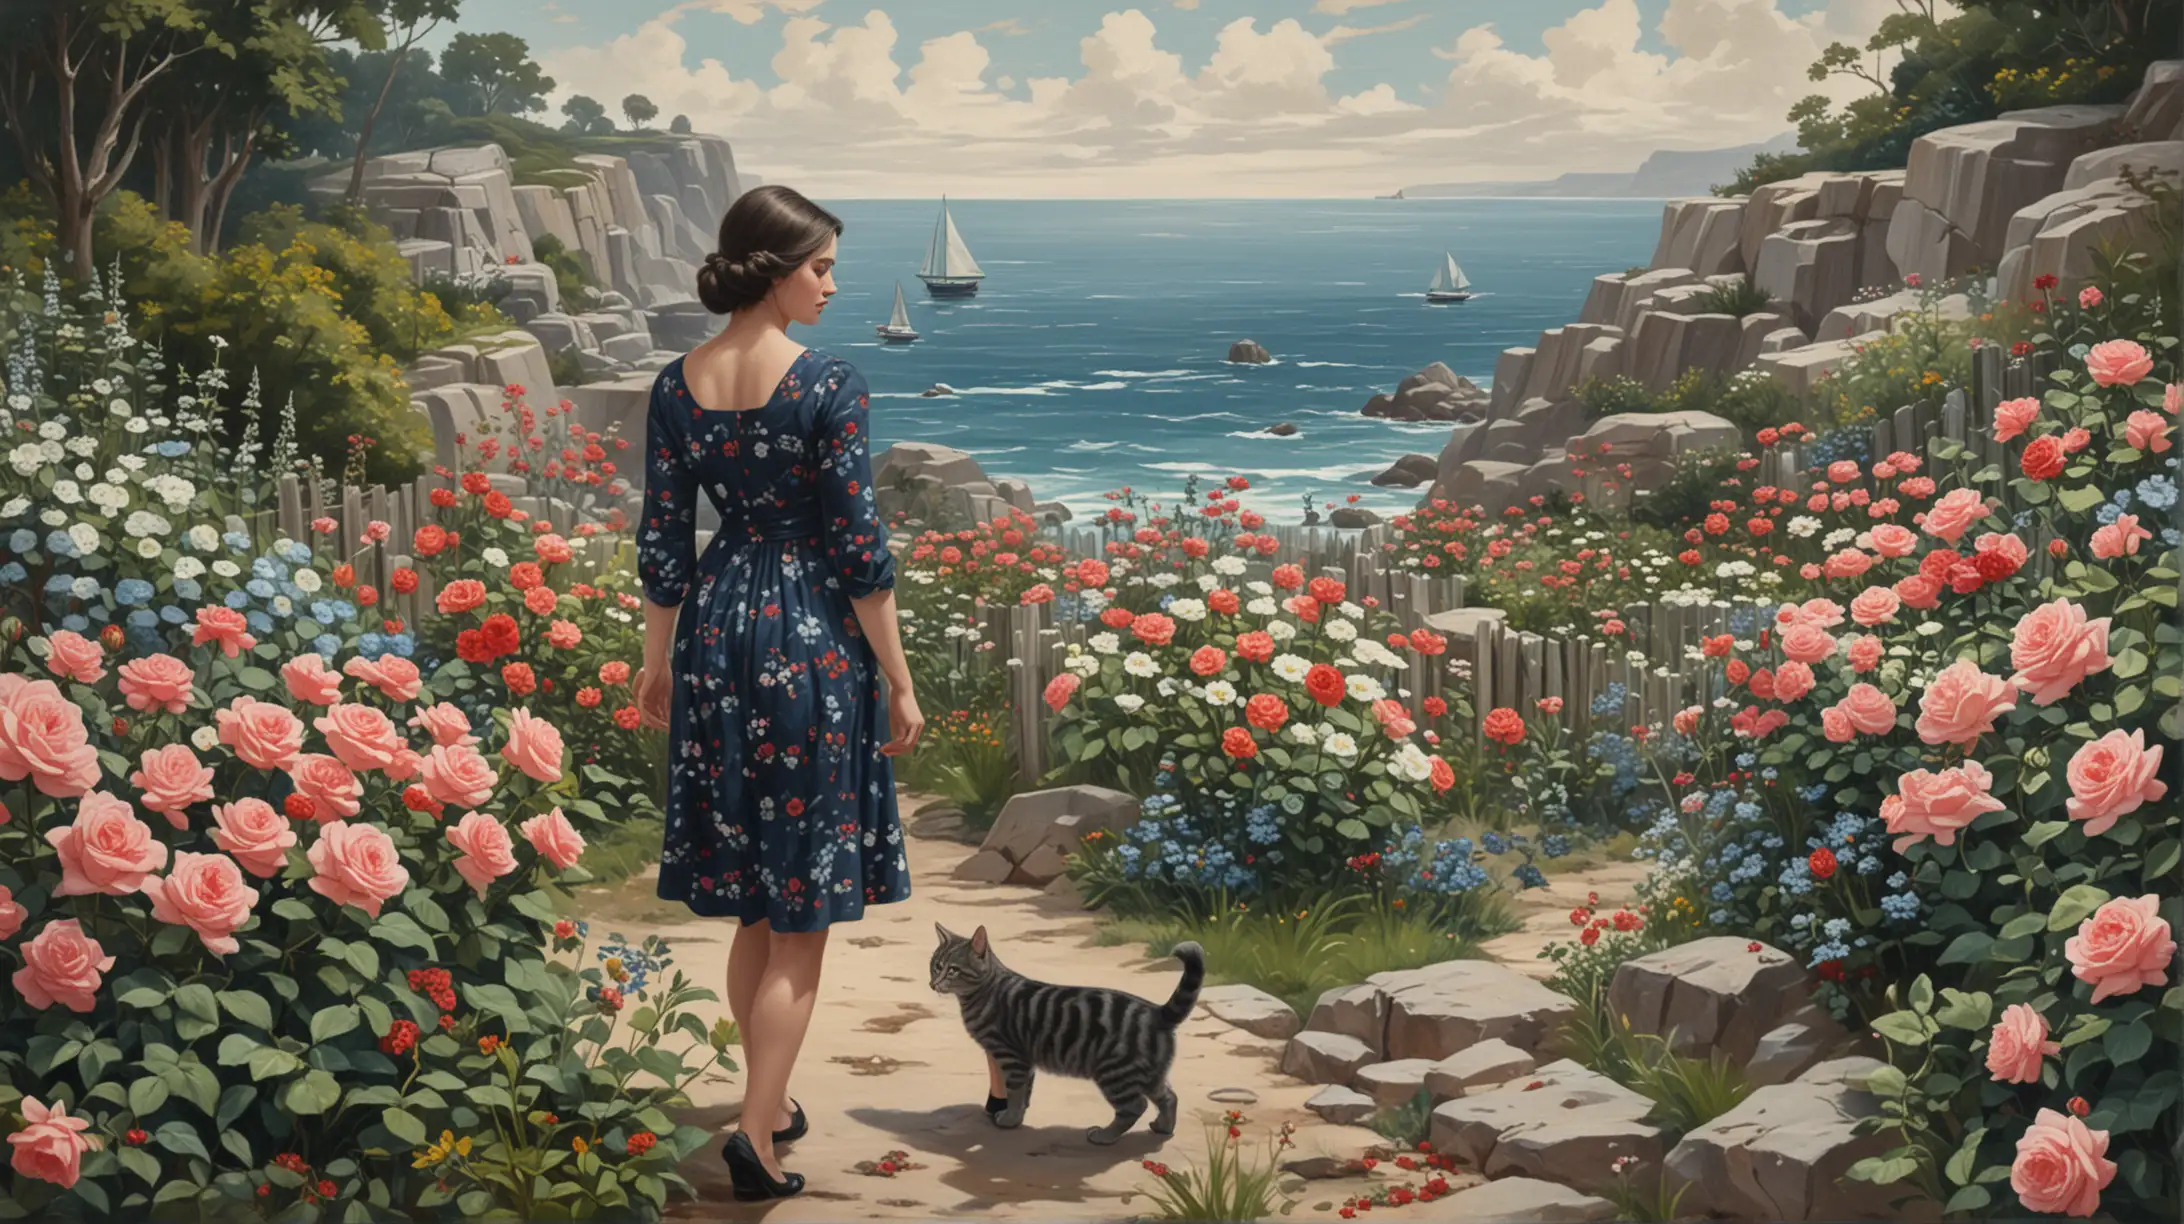 Woman Tending Flower Garden with Cats by Rocky Shore